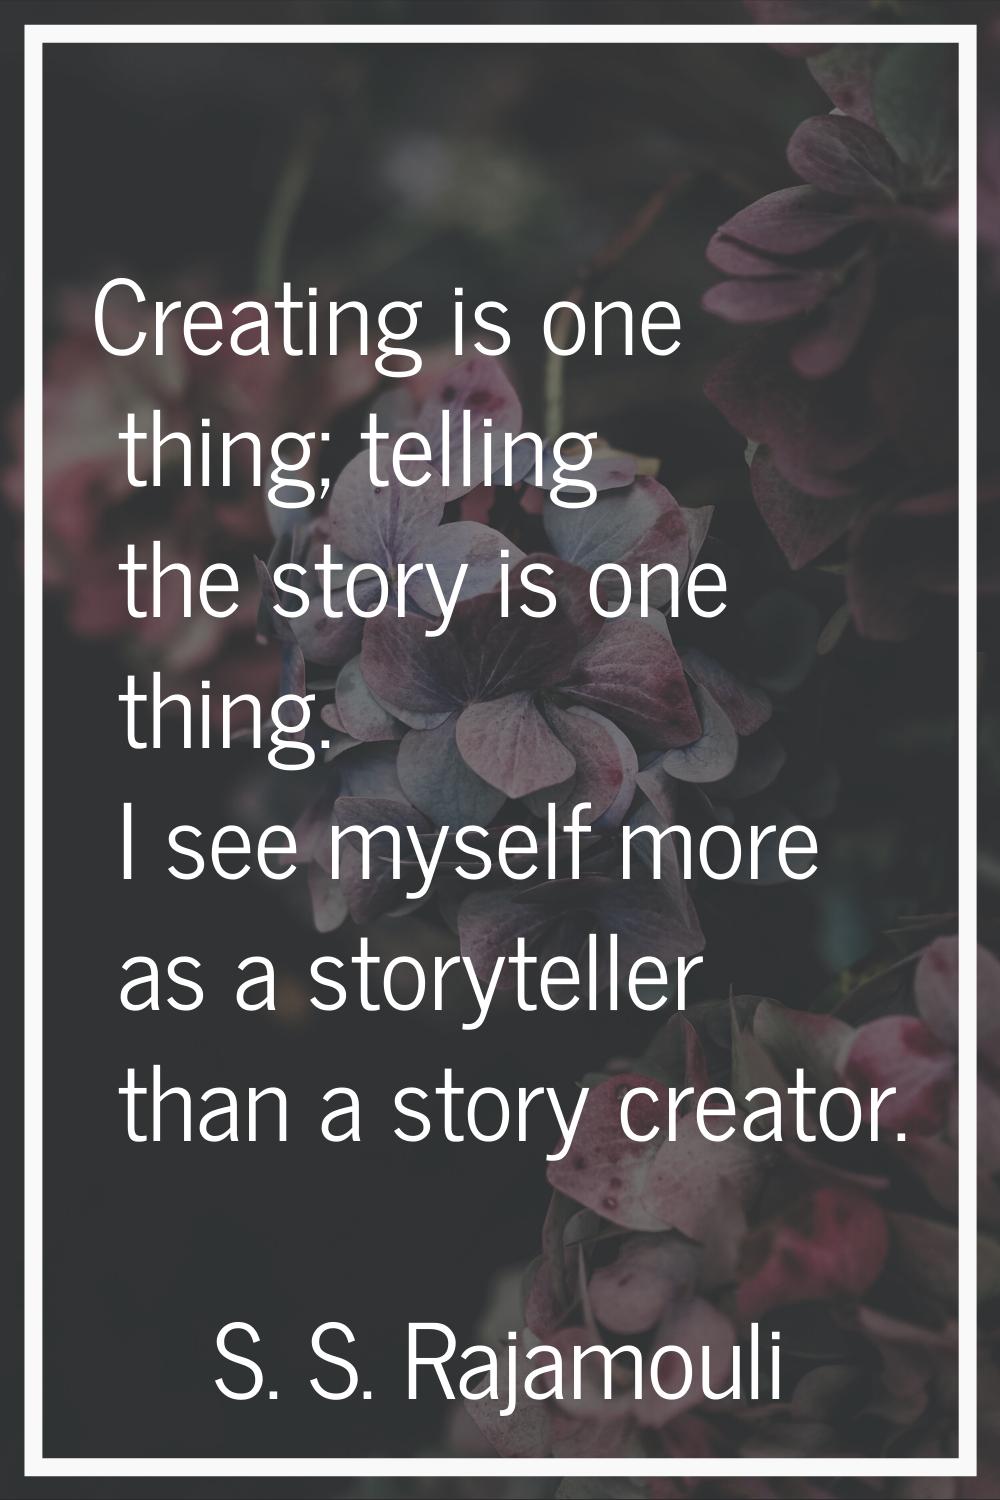 Creating is one thing; telling the story is one thing. I see myself more as a storyteller than a st